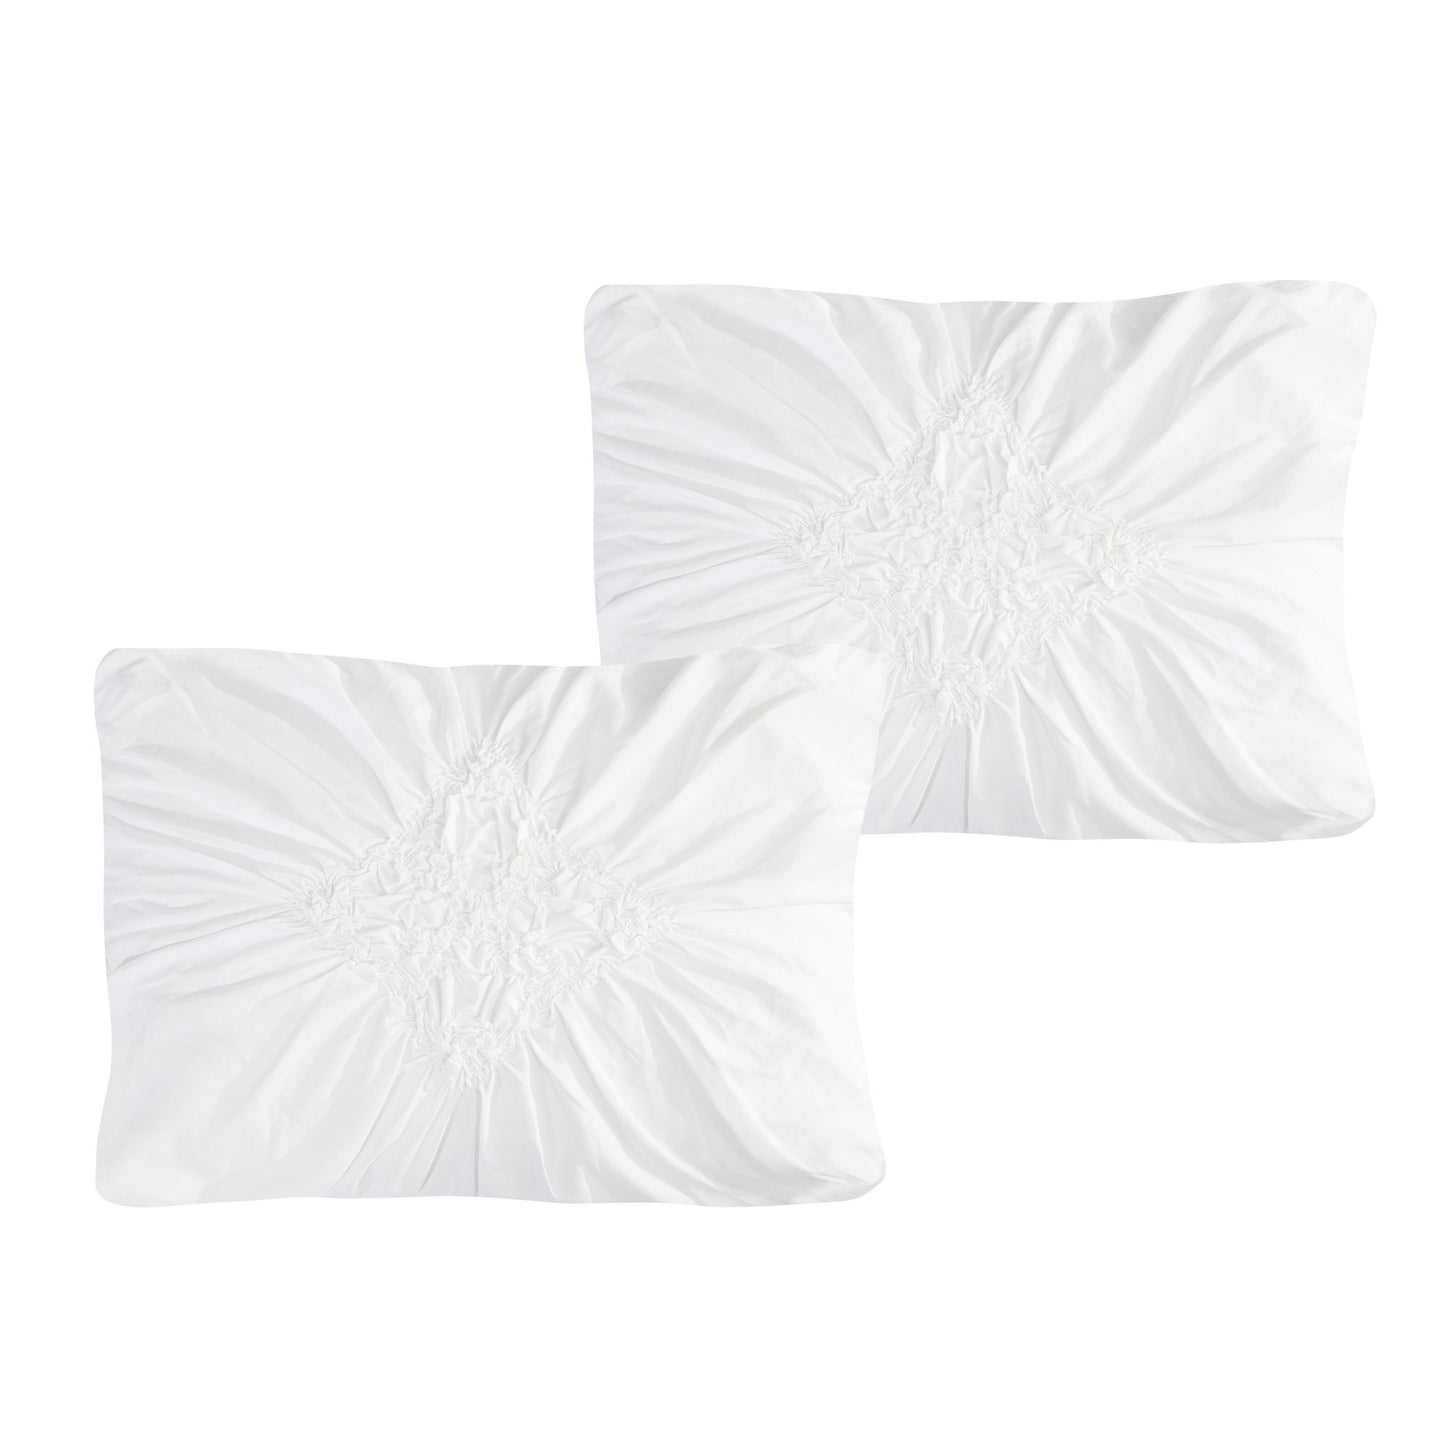 Vegas Contemporary Pinched White and Mint Comforter Set - 8 Piece Set